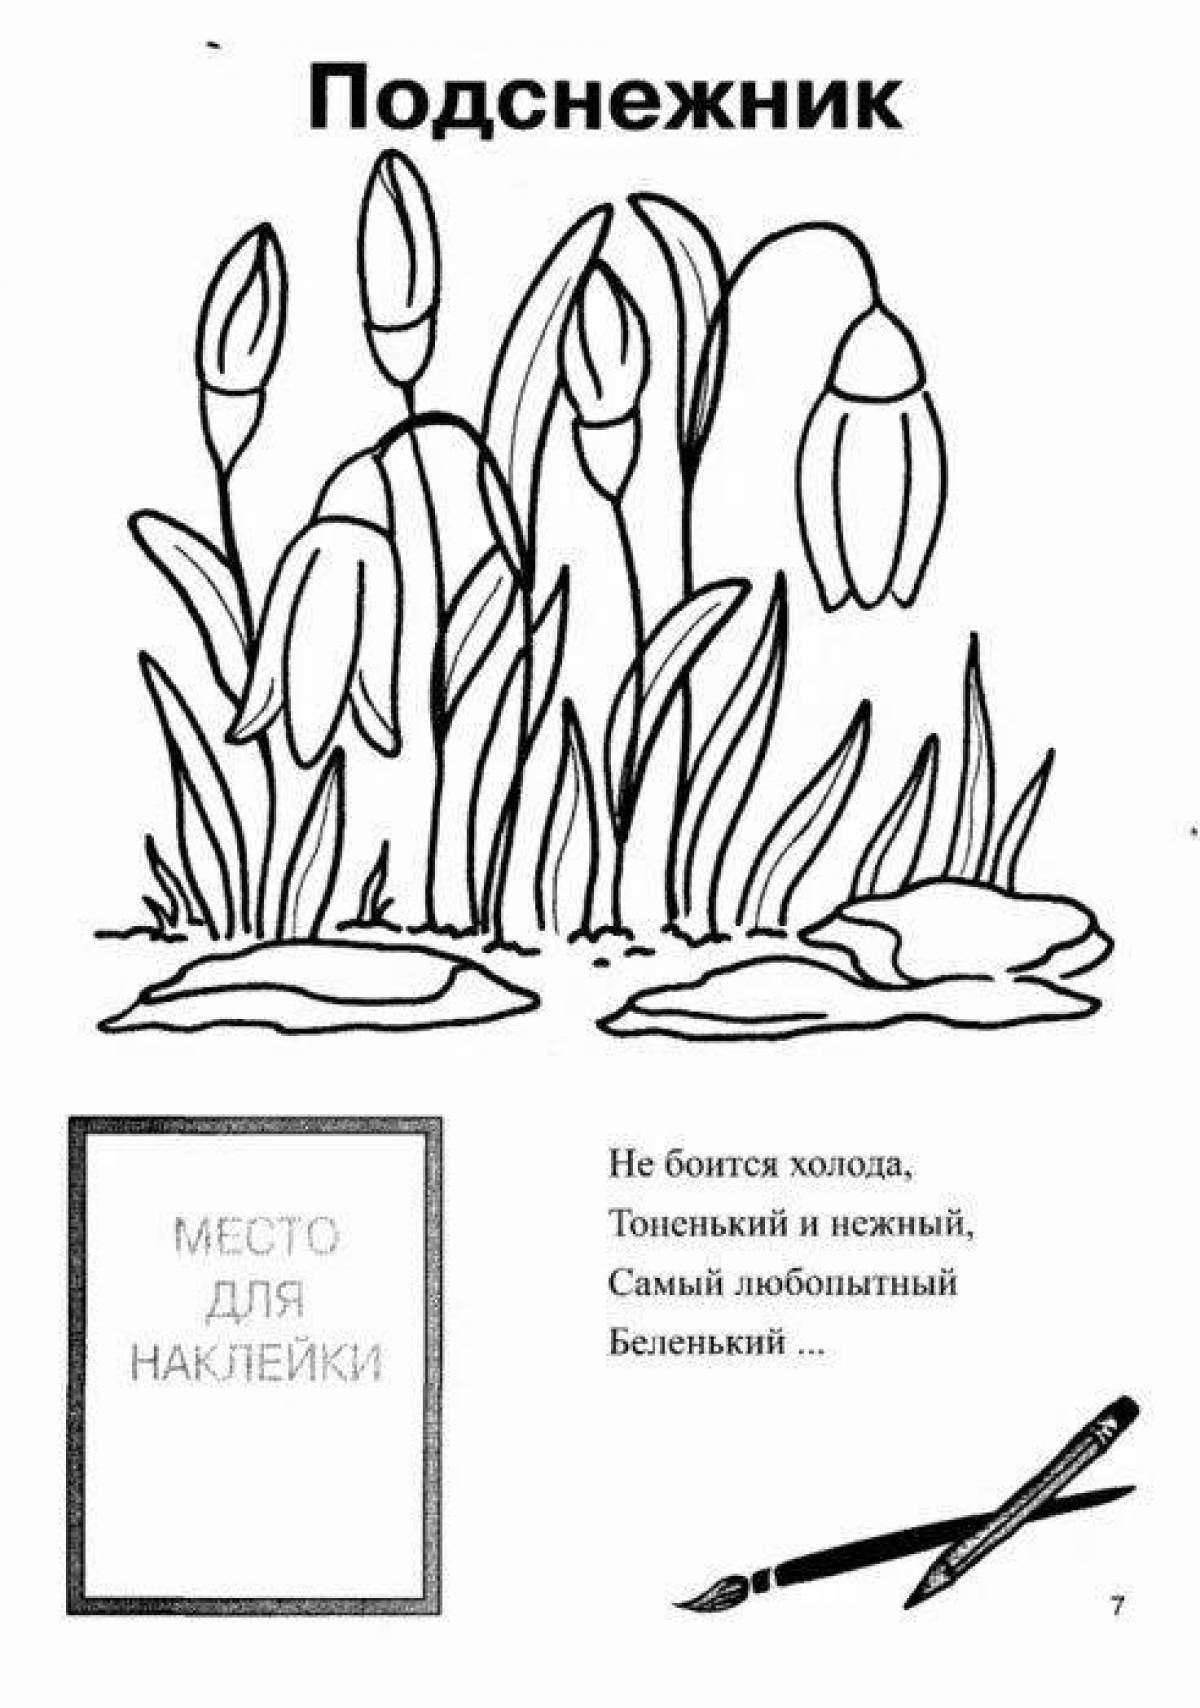 Charming coloring plant of the red book of russia